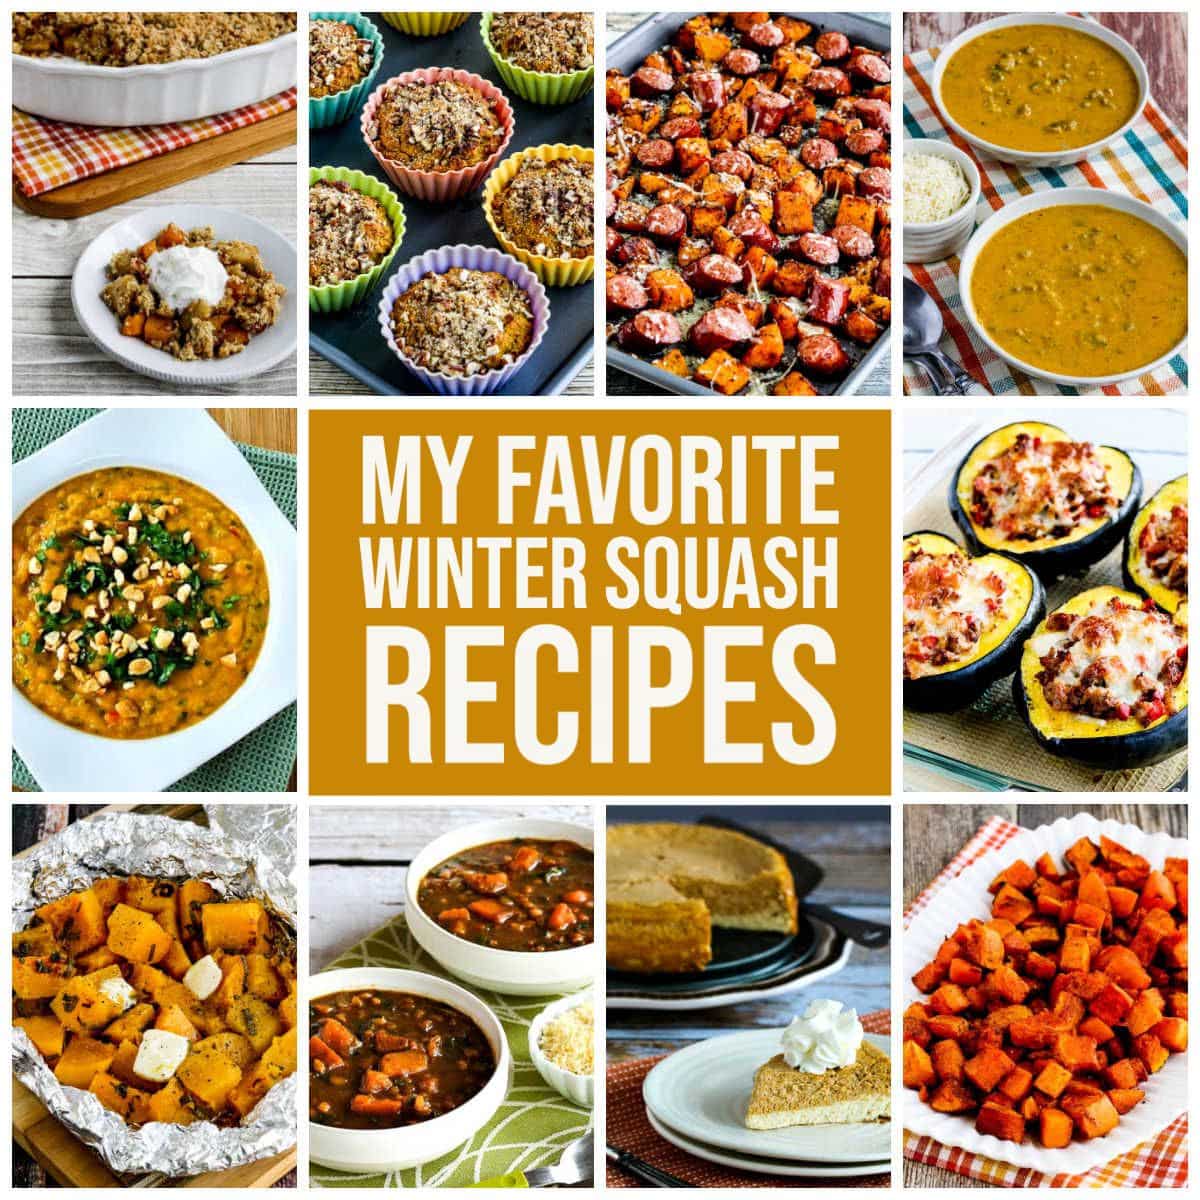 My Favorite Winter Squash Recipes Collage of featured recipes and text overlays